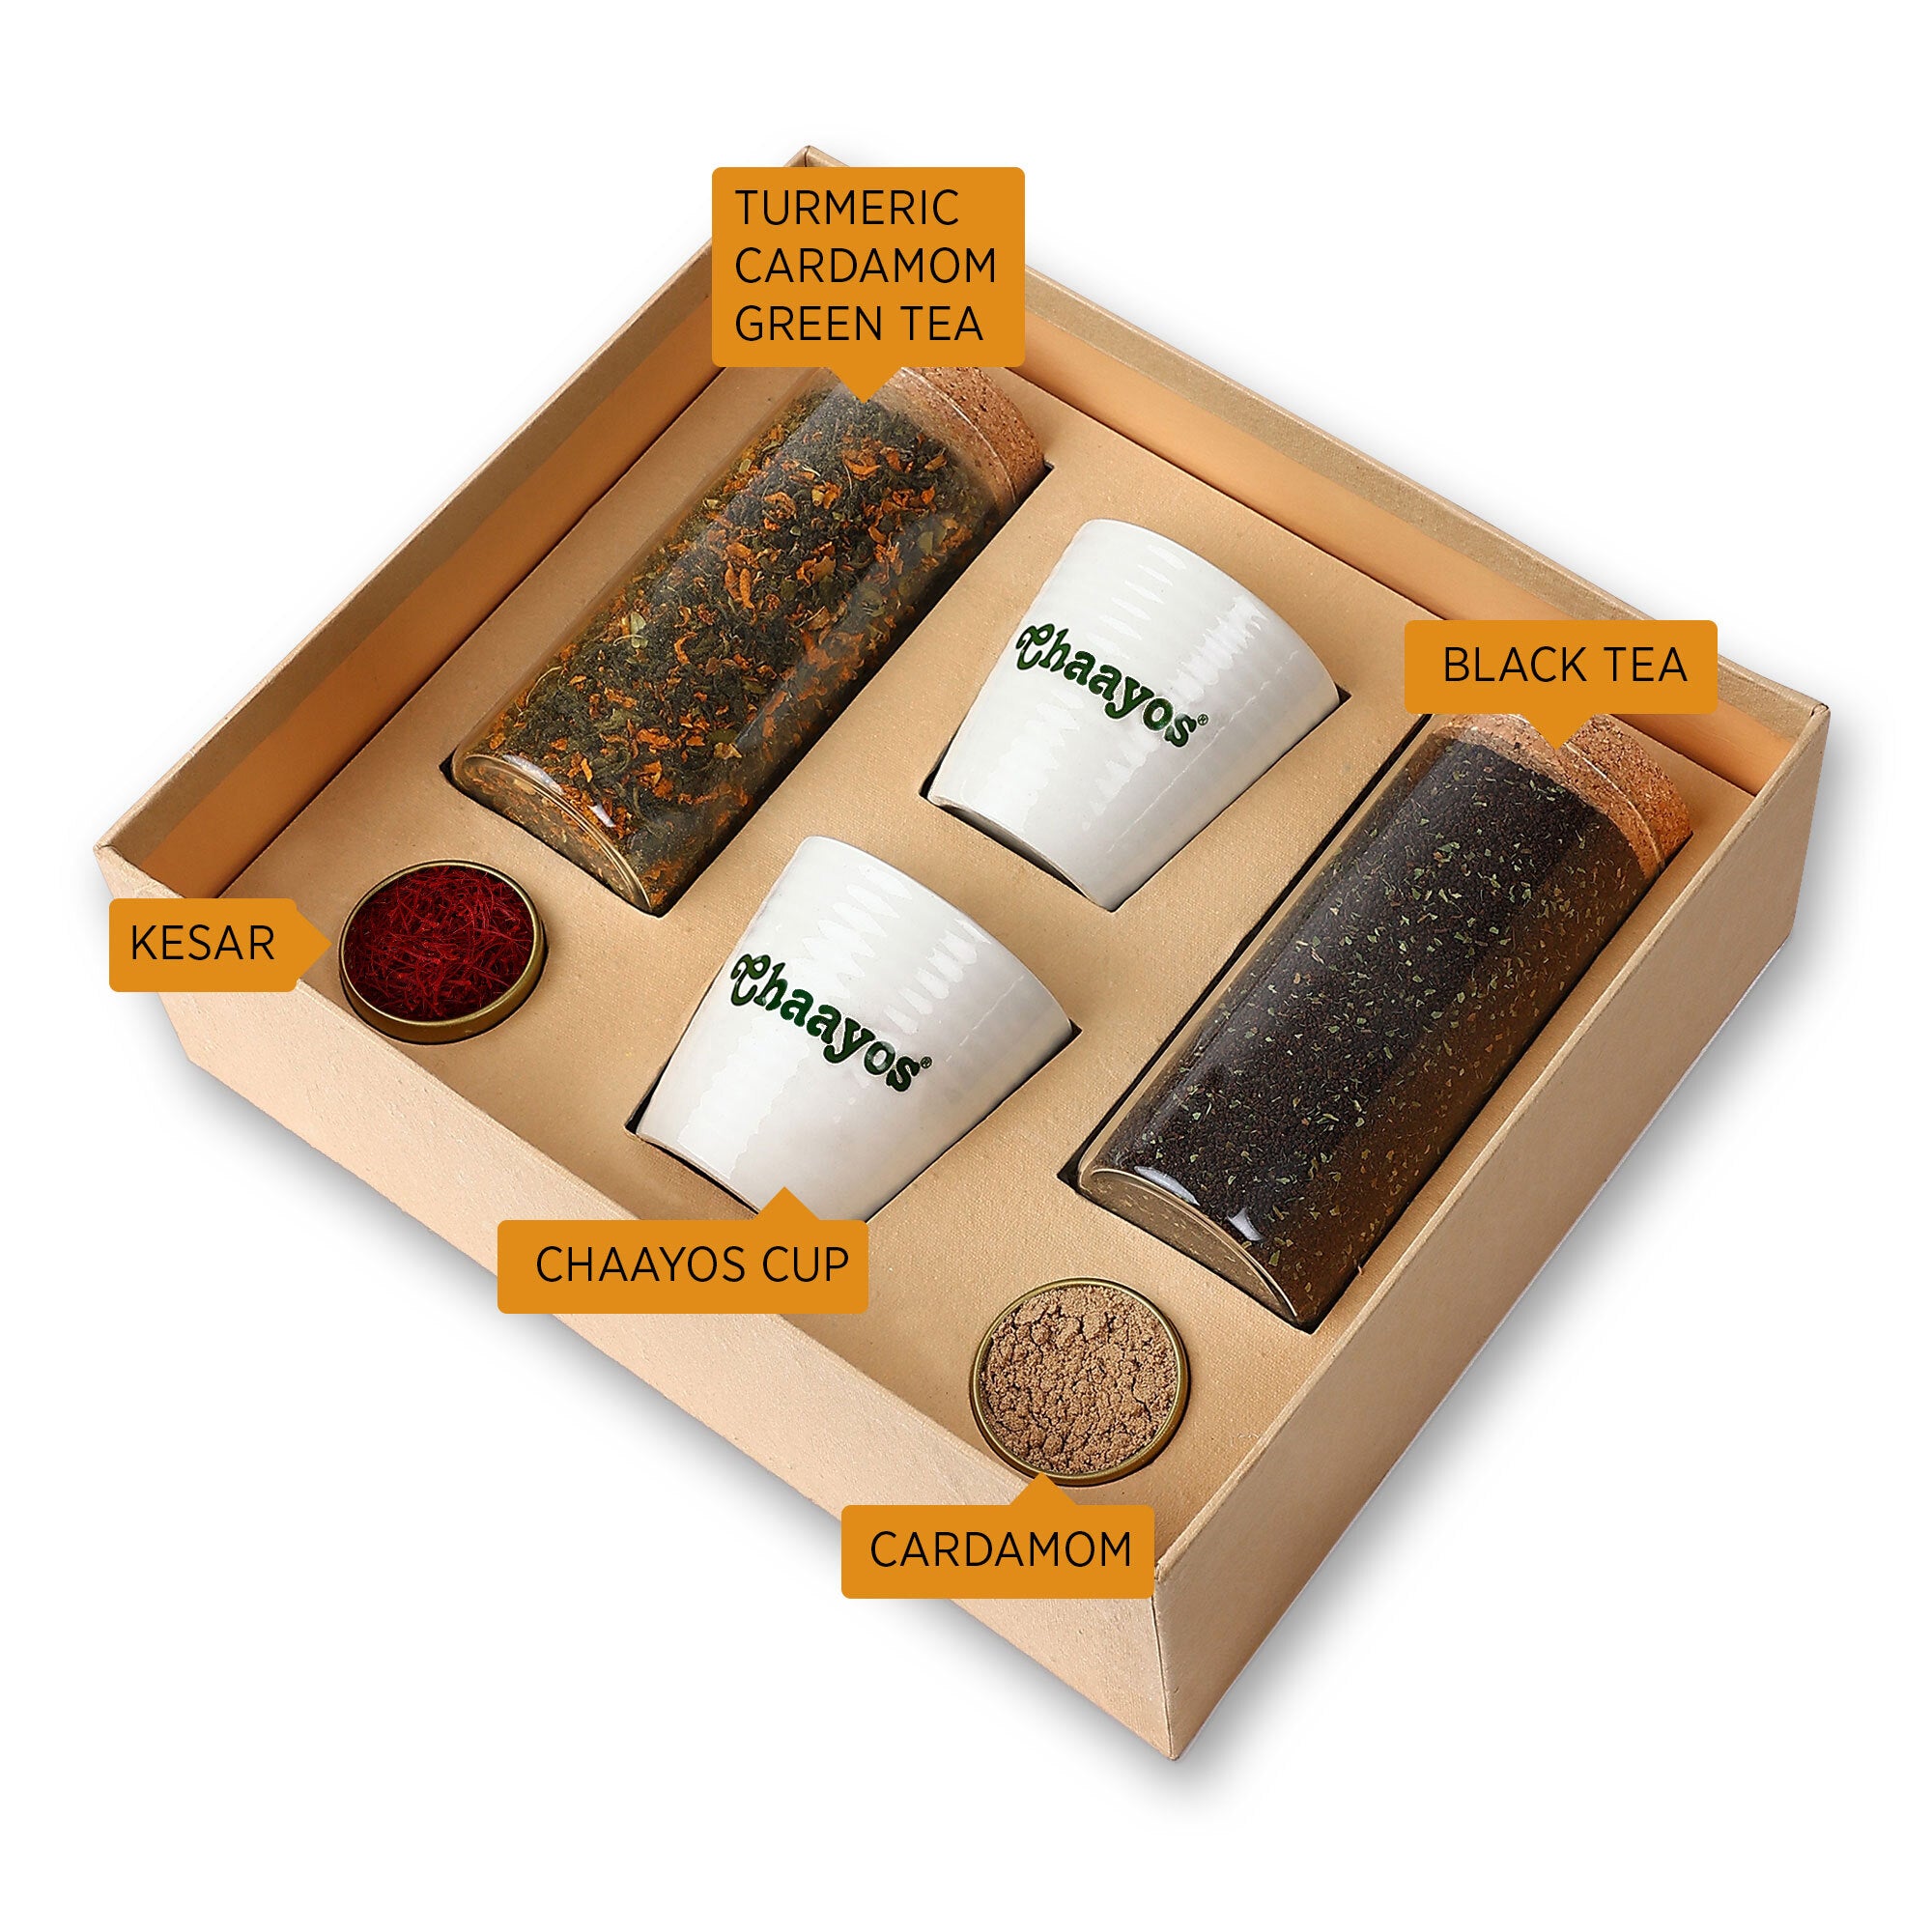 Chaayos Eco-Friendly Seed Gift Box